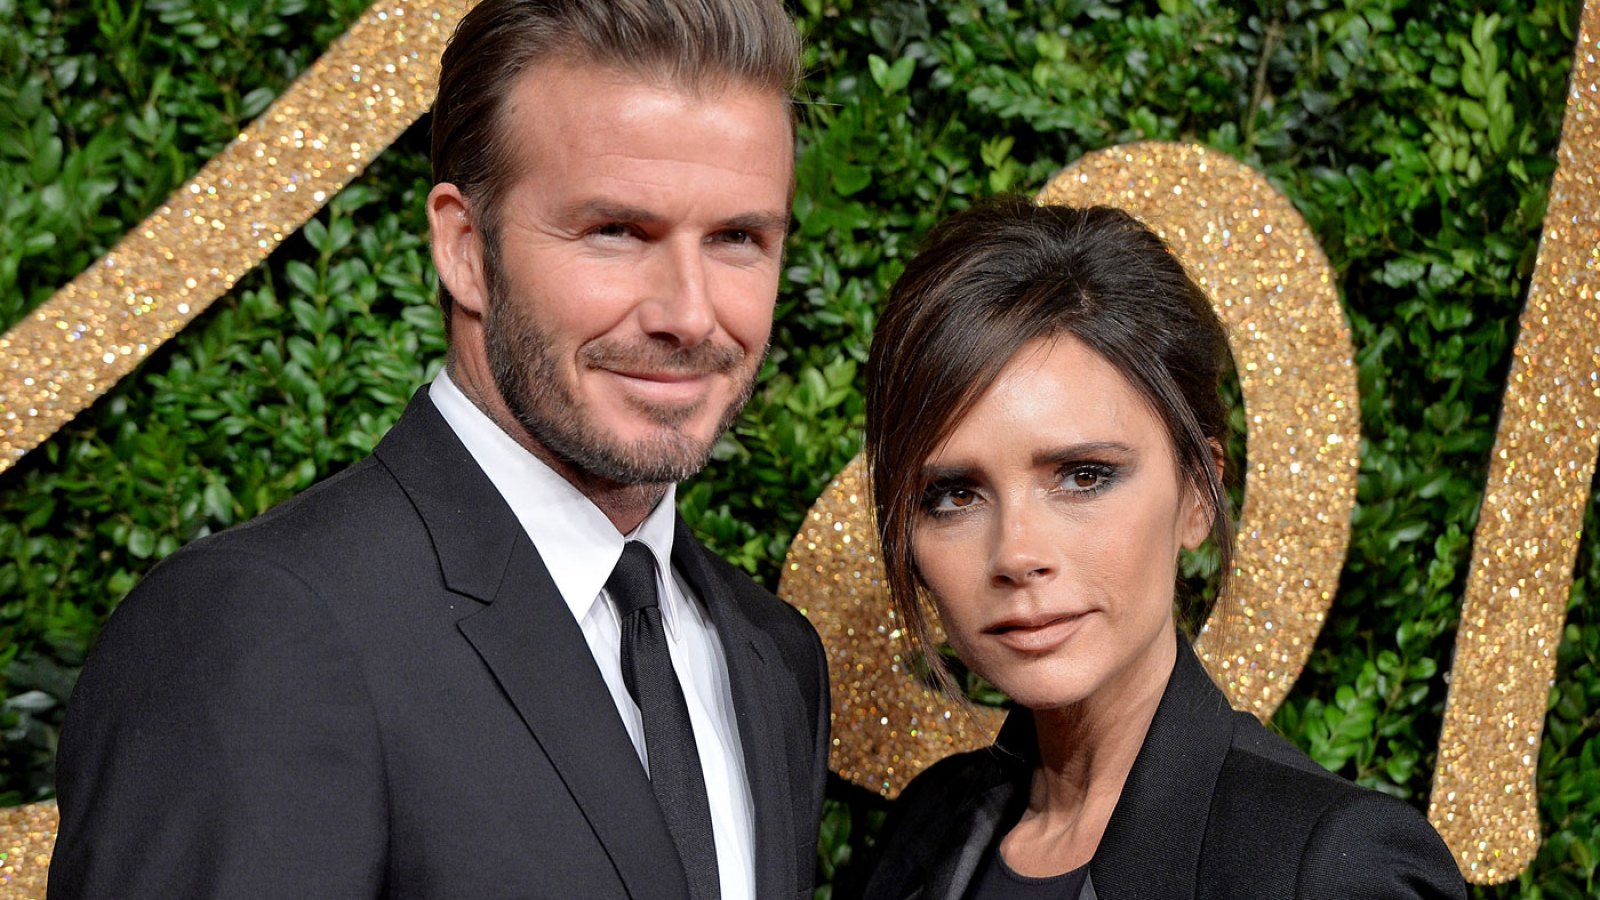 David and Victoria Beckham are celebrating 17 years of marriage